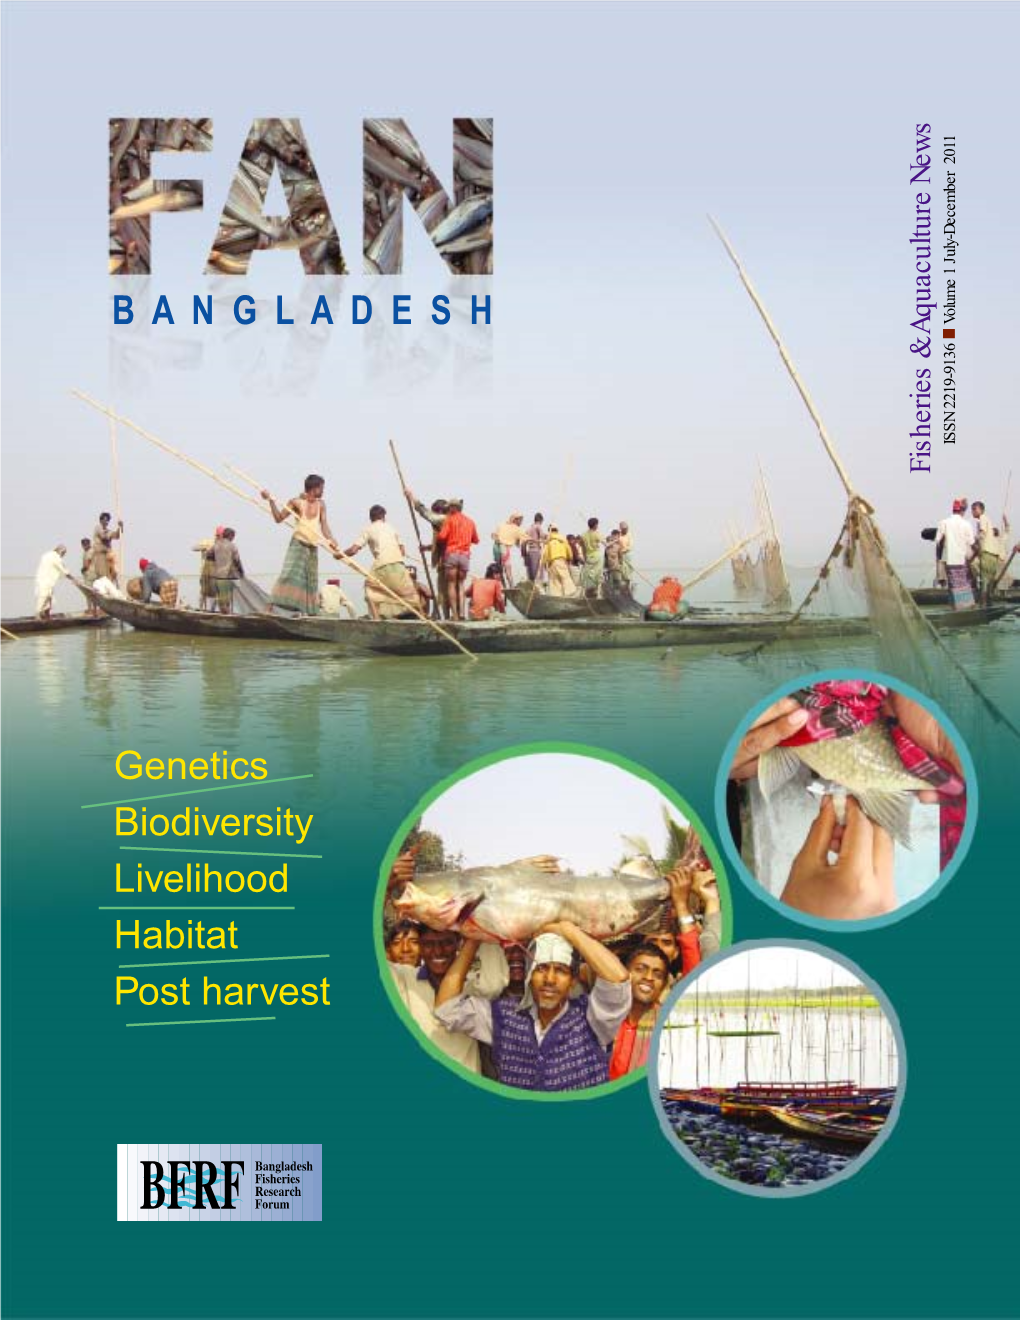 Bangladesh Fisheries Research Forum (BFRF) Fisheries & Aquaculture News House # 354 (Ground Floor) Road # 27, New DOHS, Mohakhali Dhaka -1206 B a N G L a D E S H